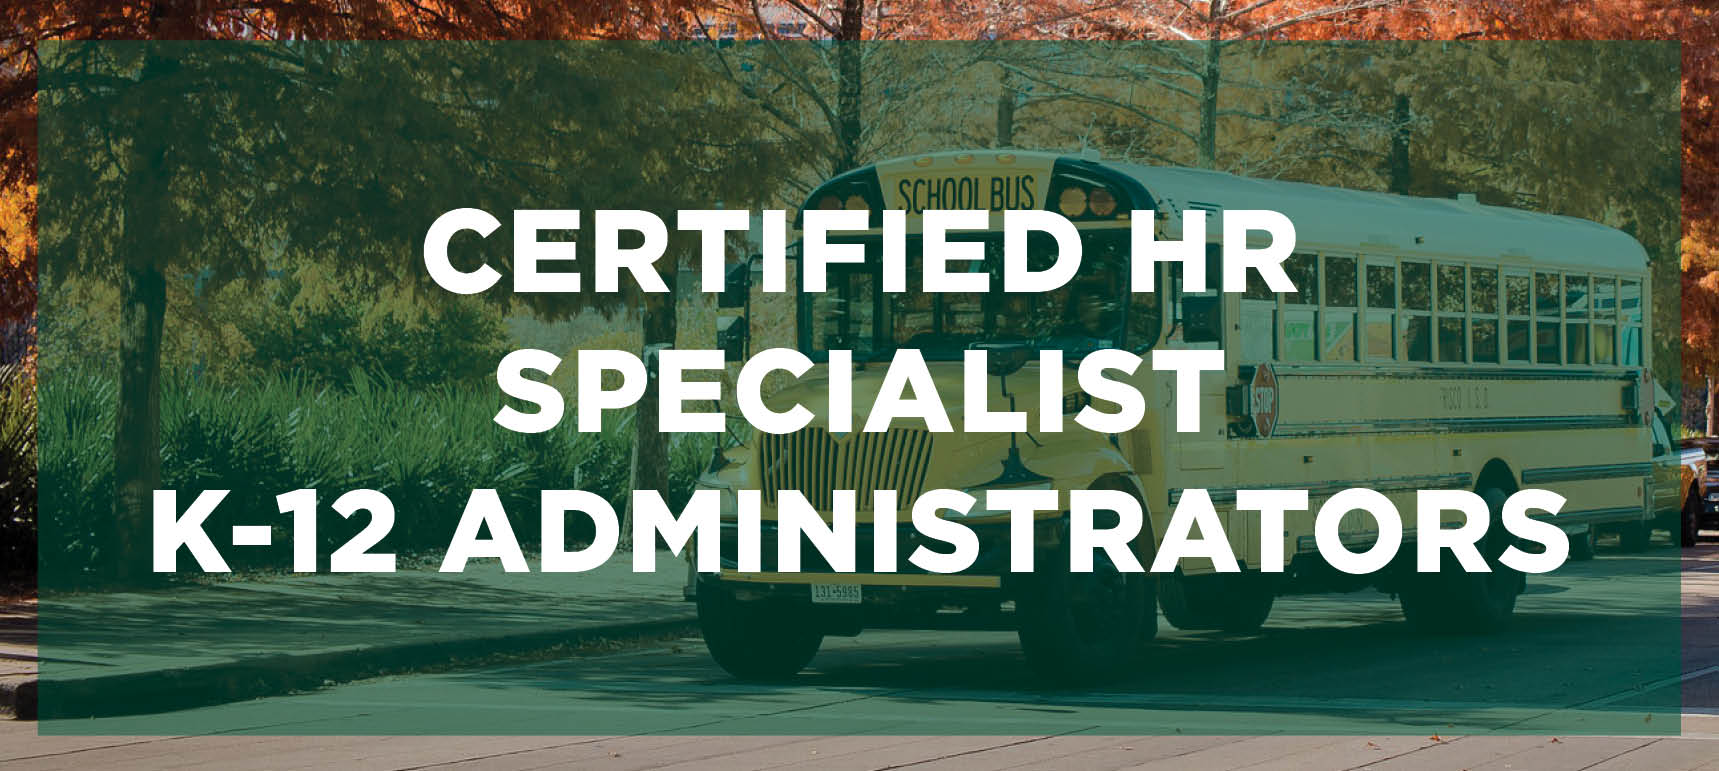 Certified HR Specialist for K-12 Administrator